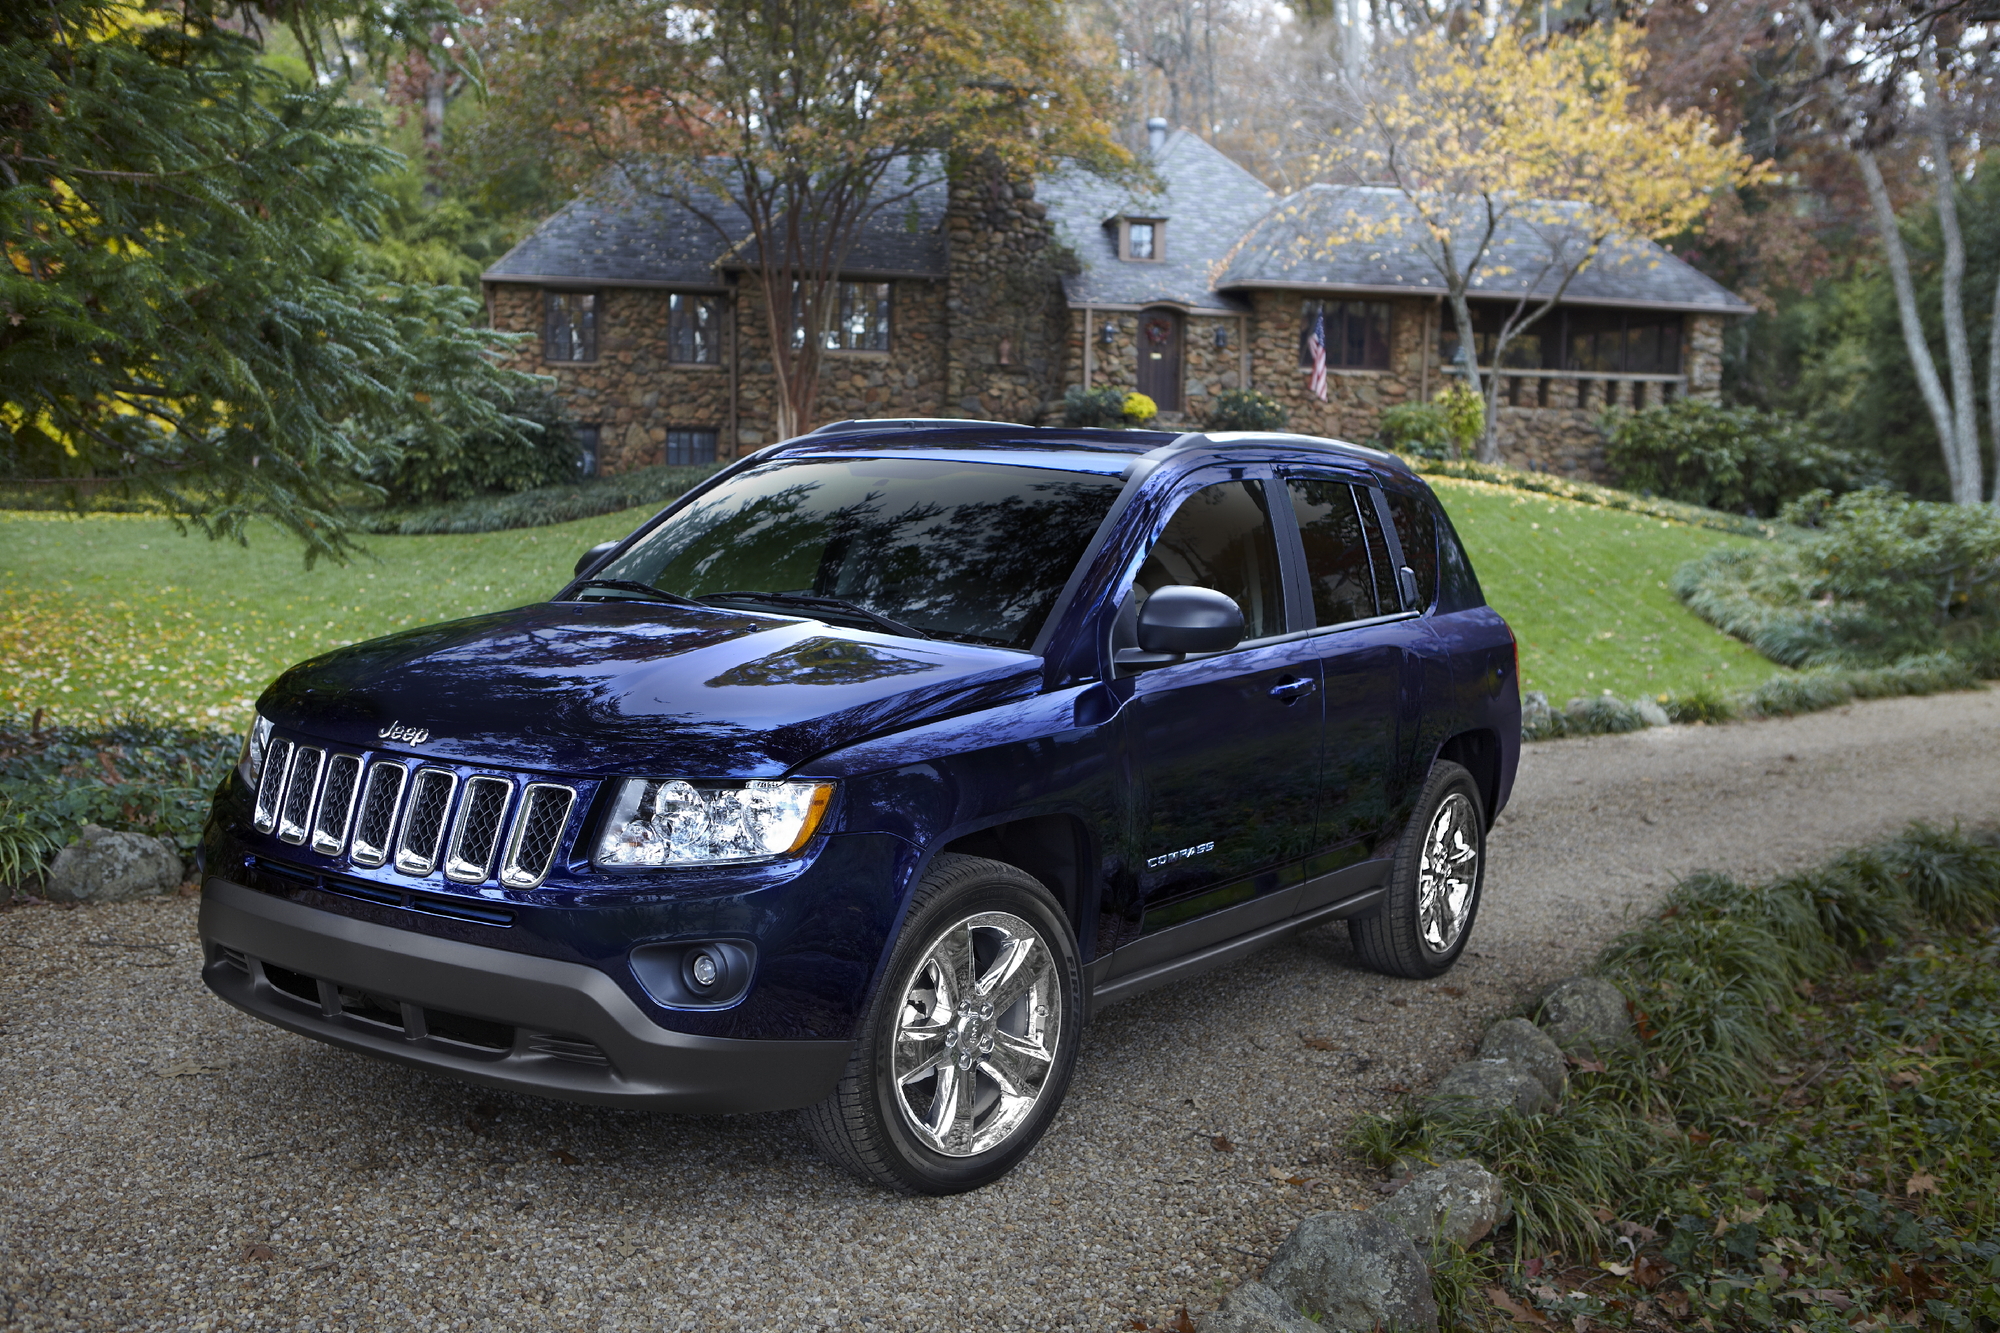 2019 Jeep Compass: Specs, Prices, Ratings, and Reviews